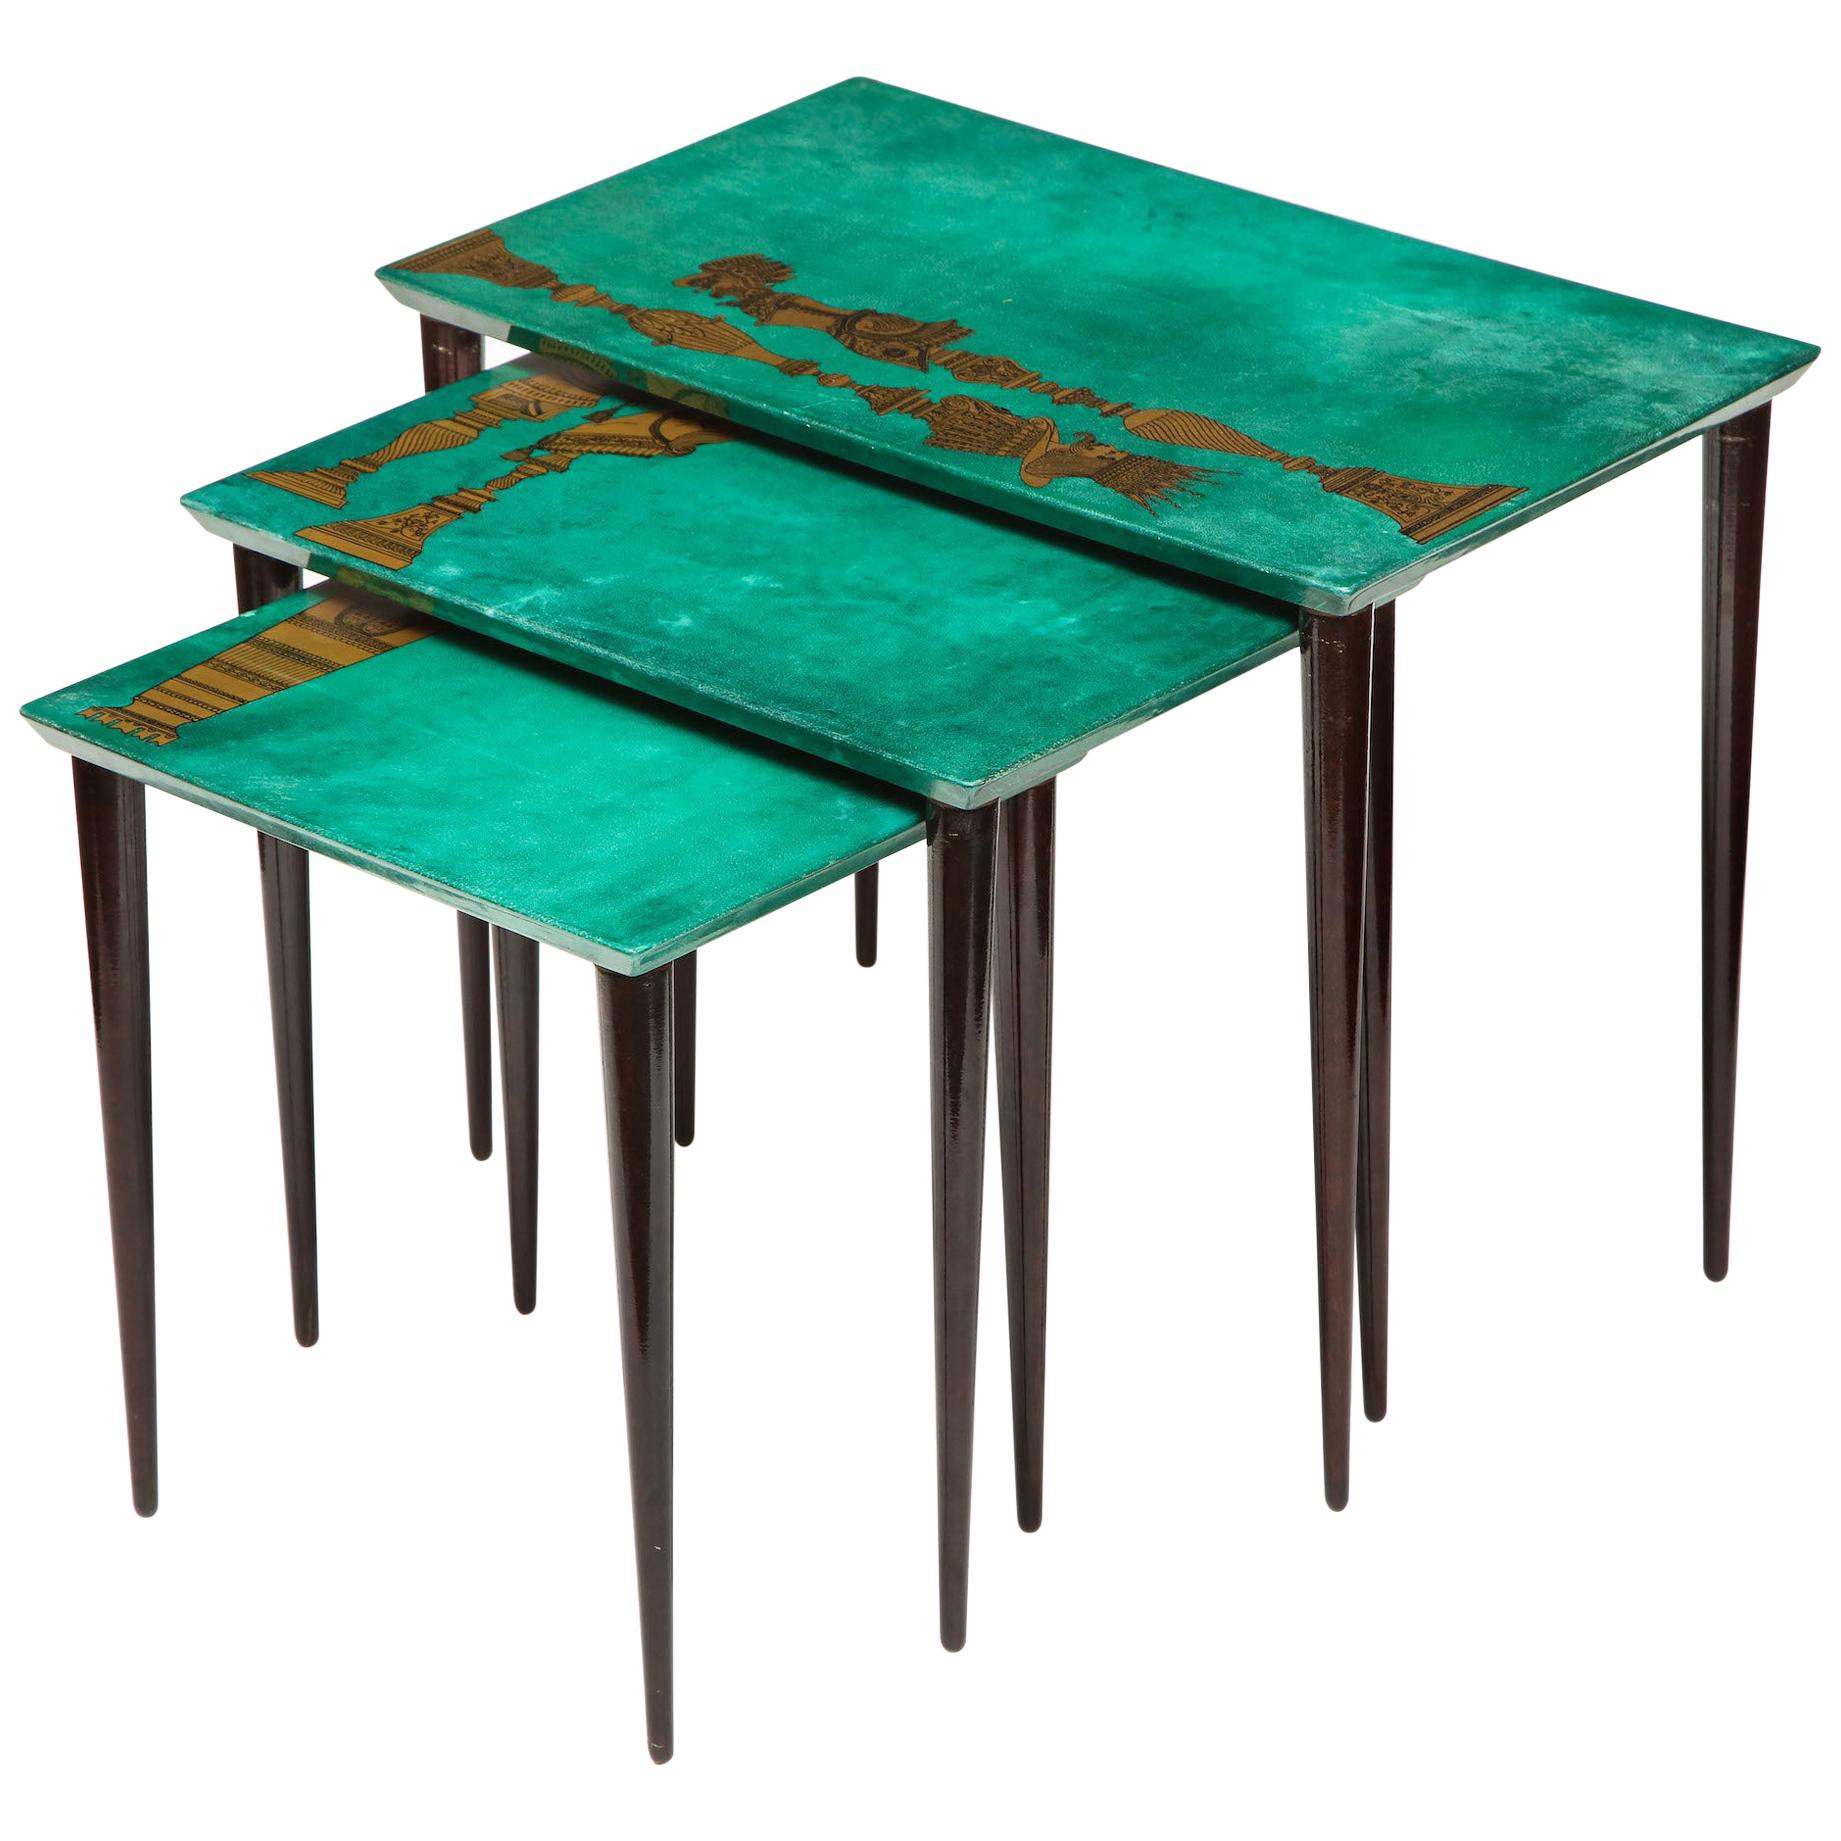 3-Piece Emerald Leather Nesting Table Set by Aldo Tura